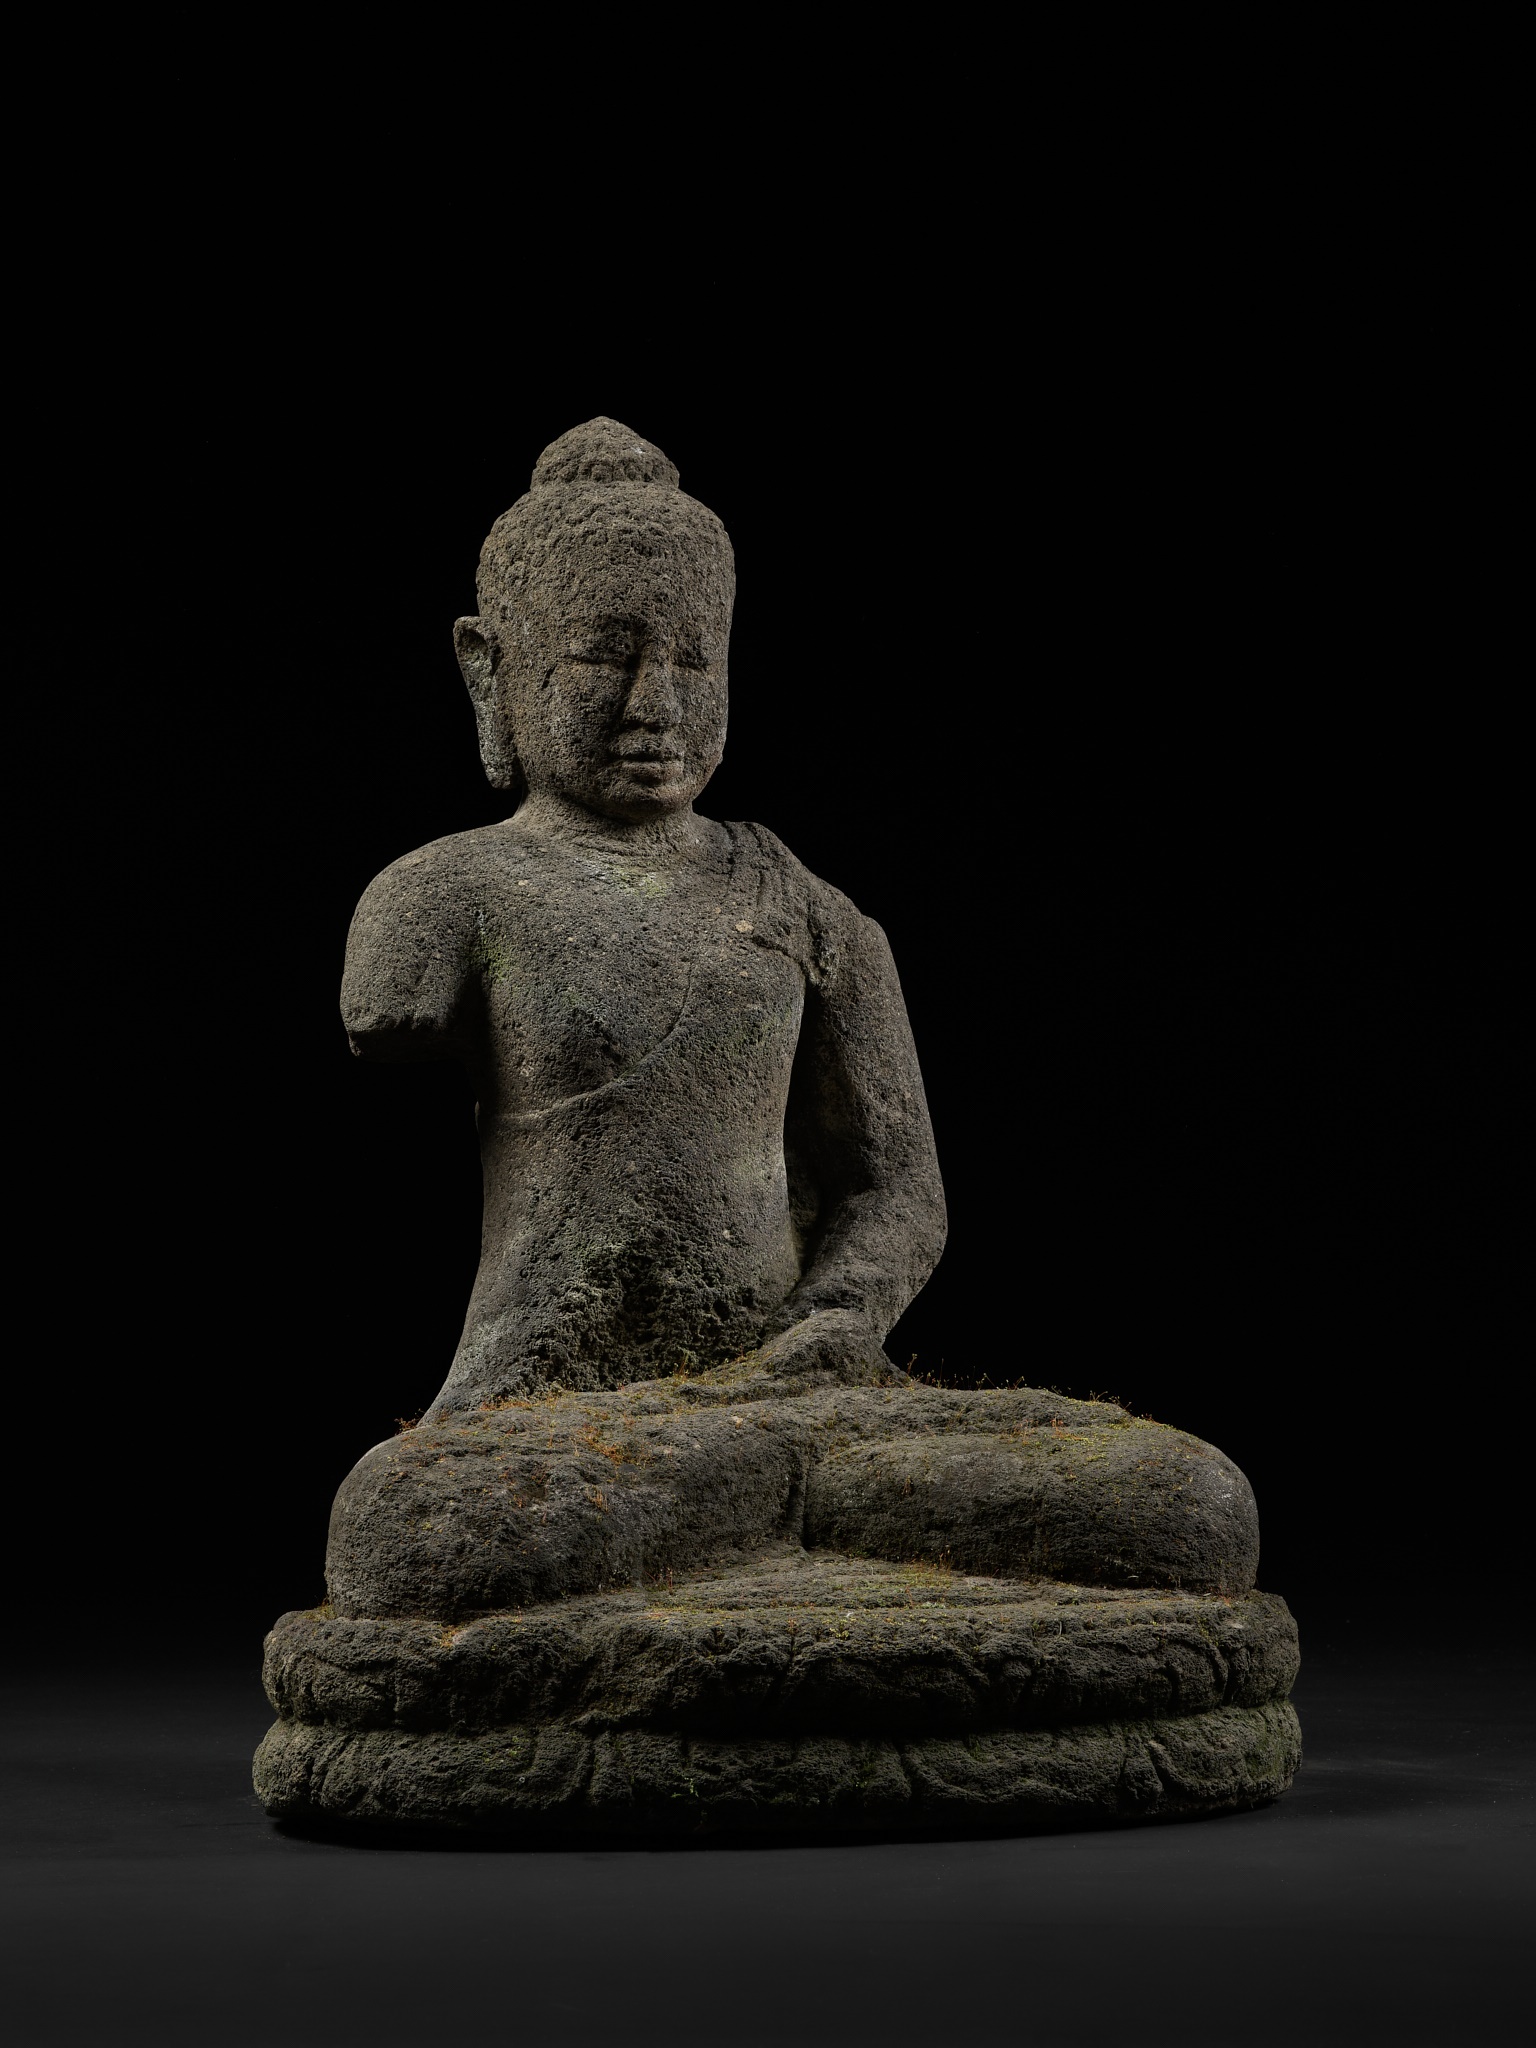 A VOLCANIC STONE FIGURE OF BUDDHA, CENTRAL JAVA, INDONESIA, FIRST HALF OF THE 9TH CENTURY - Image 9 of 14